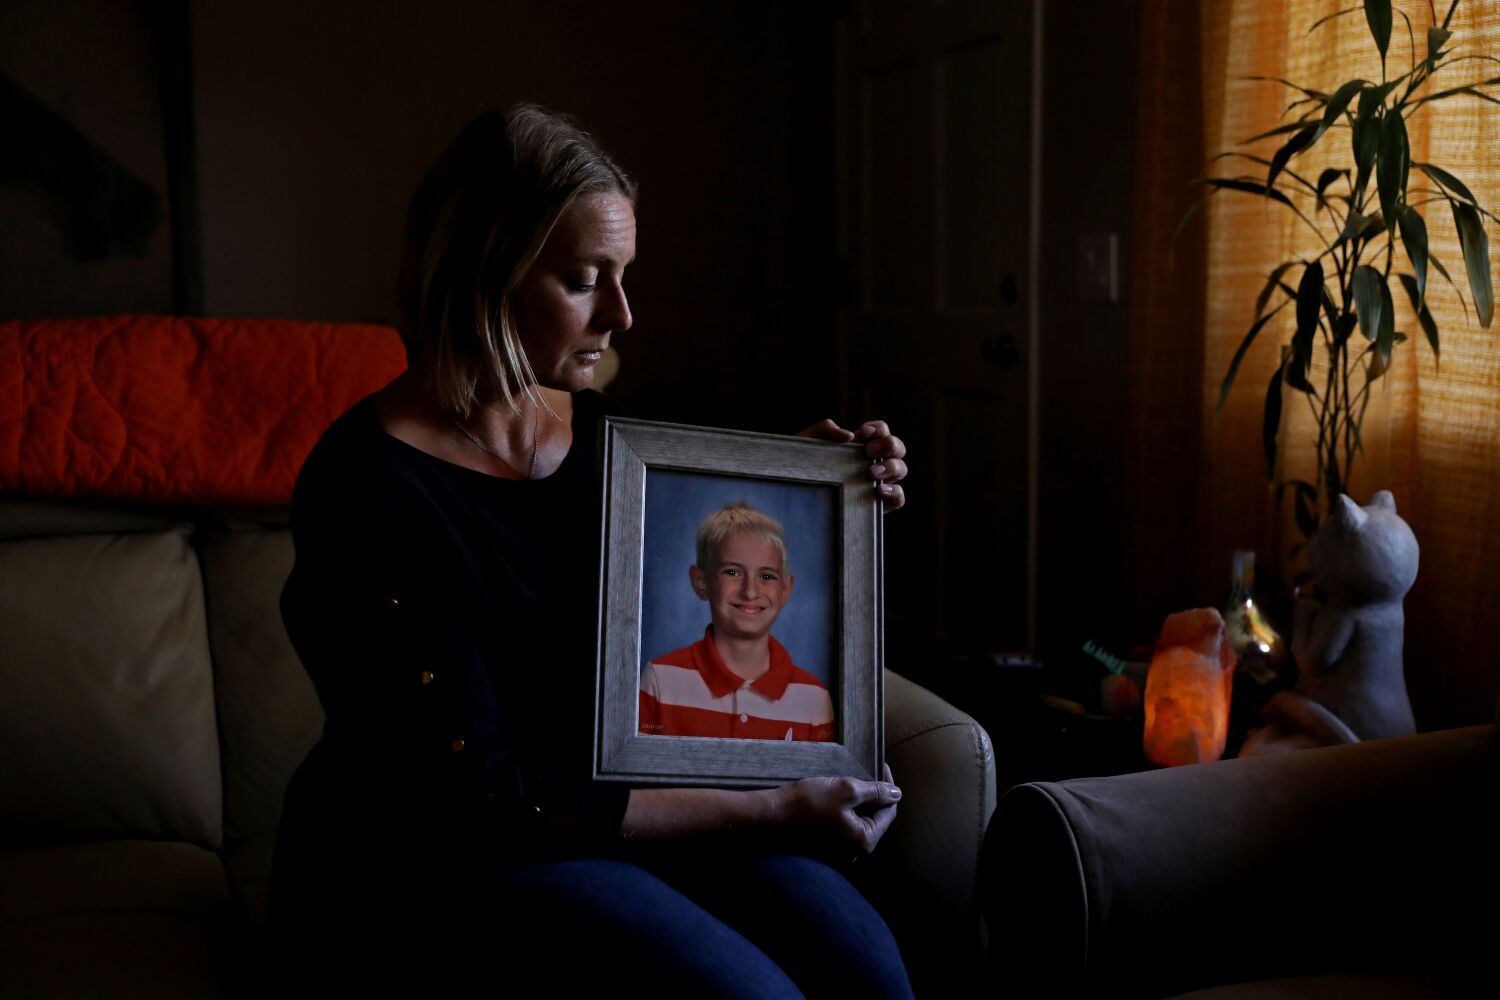 He threatened to kill his son. He was still able to purchase a gun. Now, a bereaved mother asks how